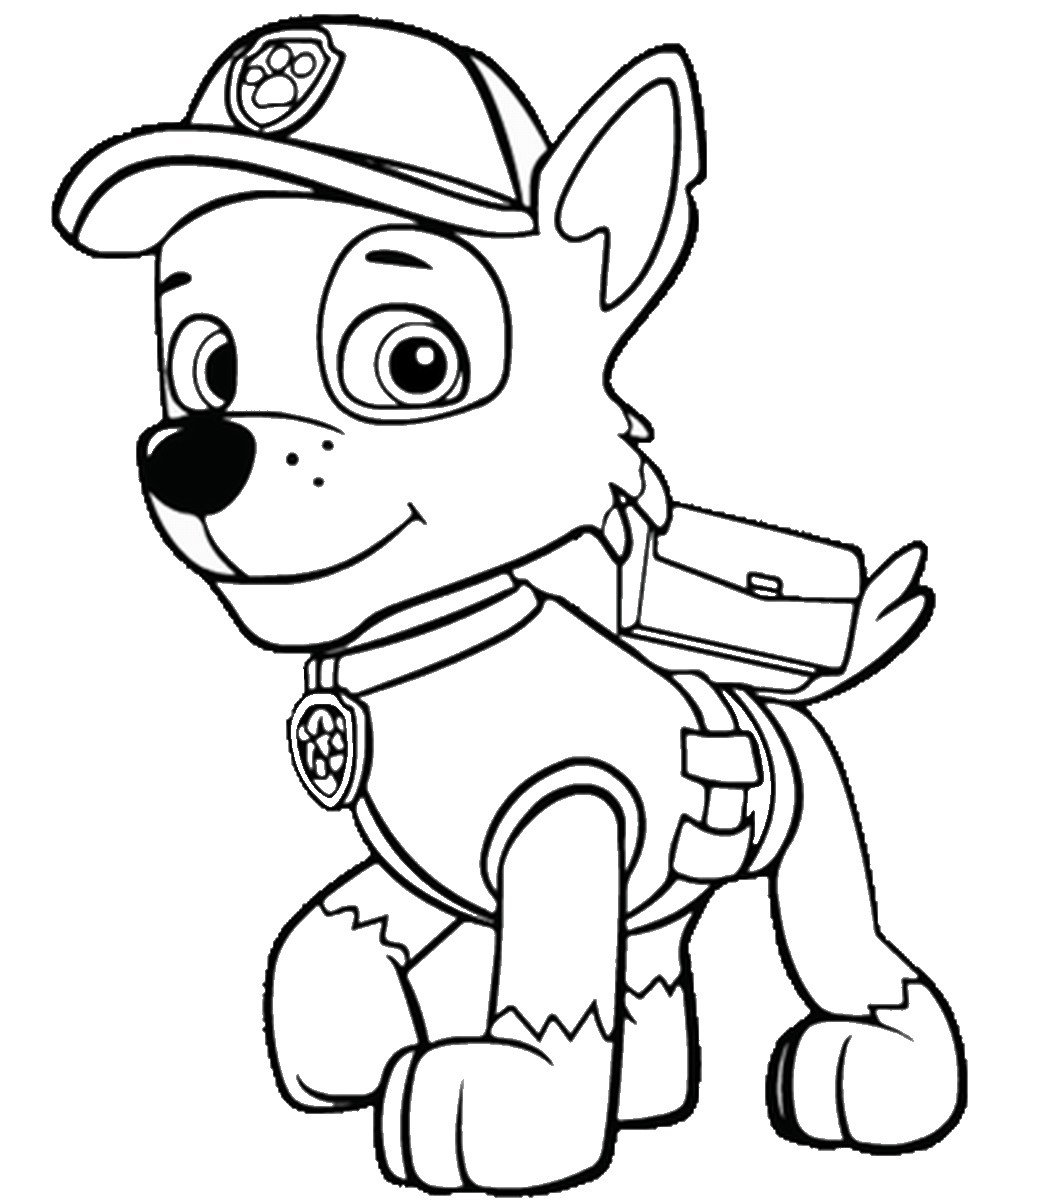 Paw patrol clipart black and white 3 » Clipart Station.